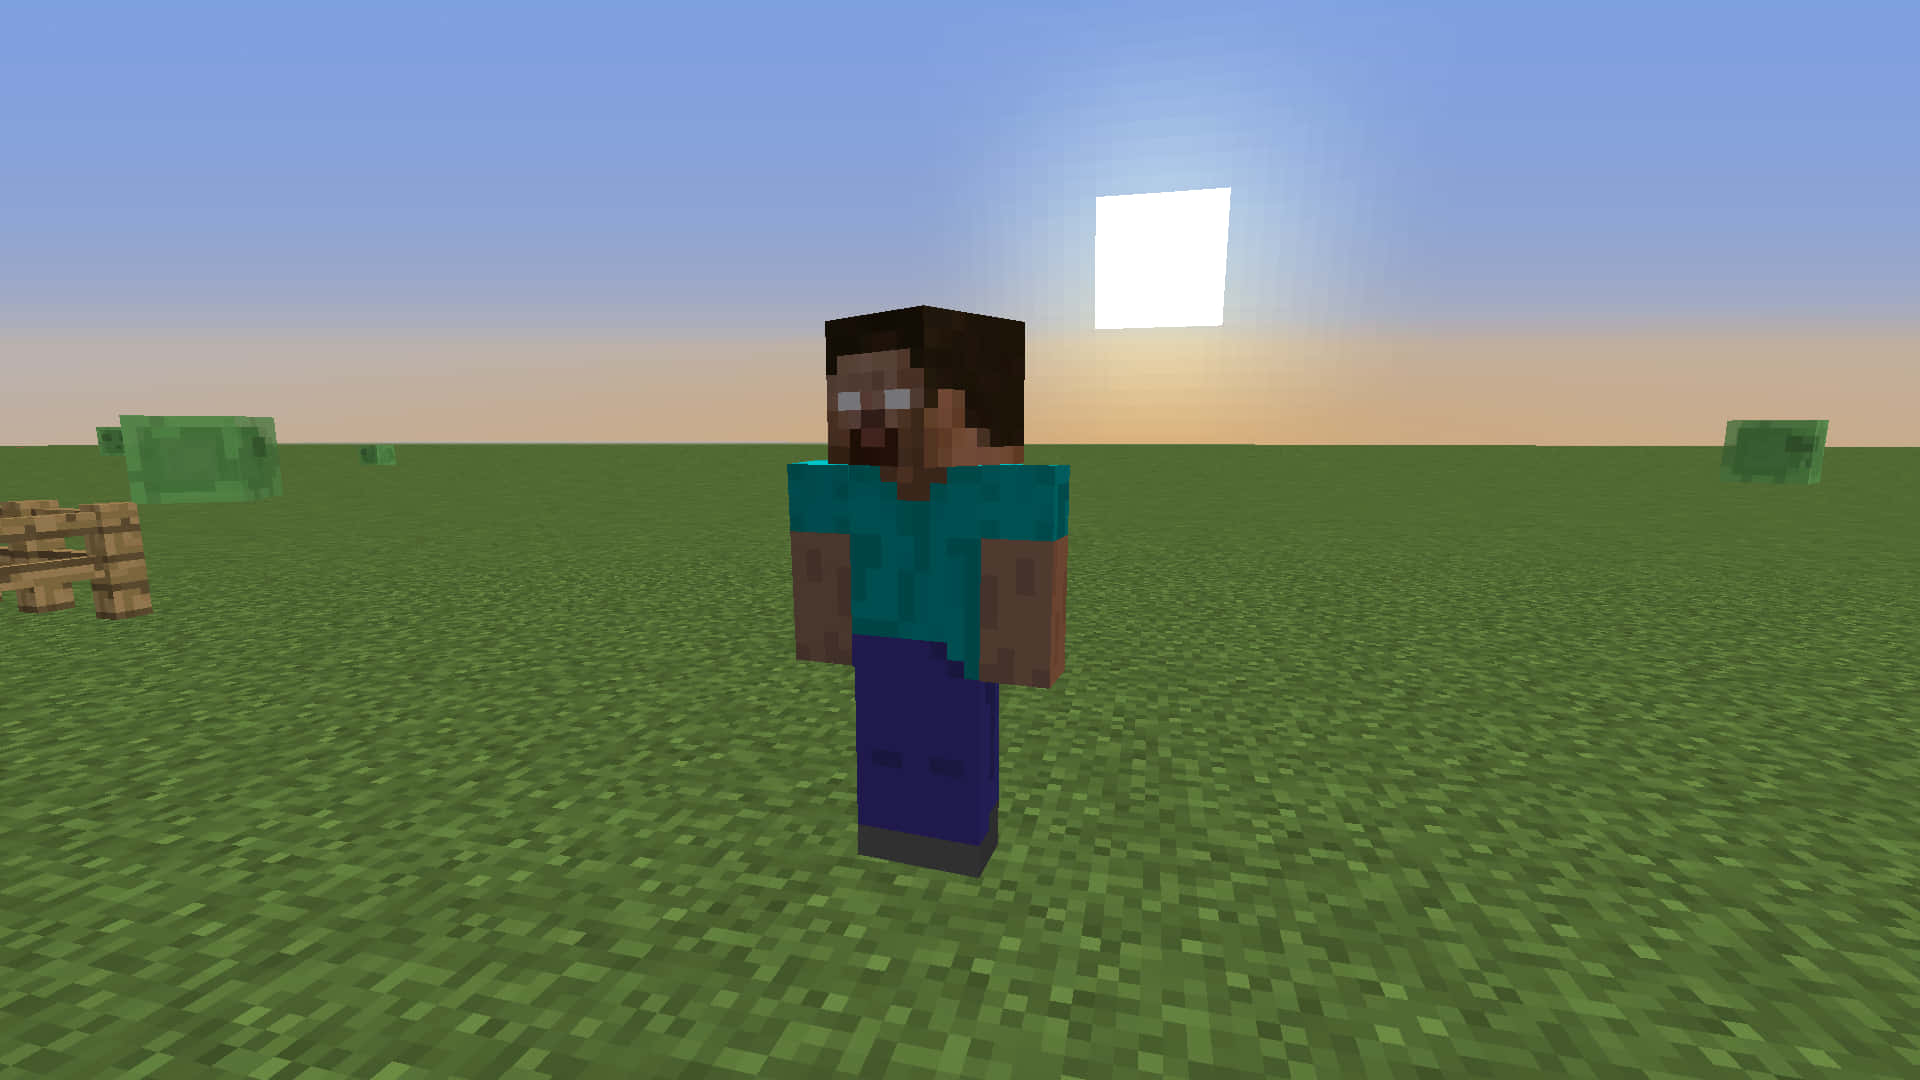 Herobrine, The Mysterious Character from Minecraft